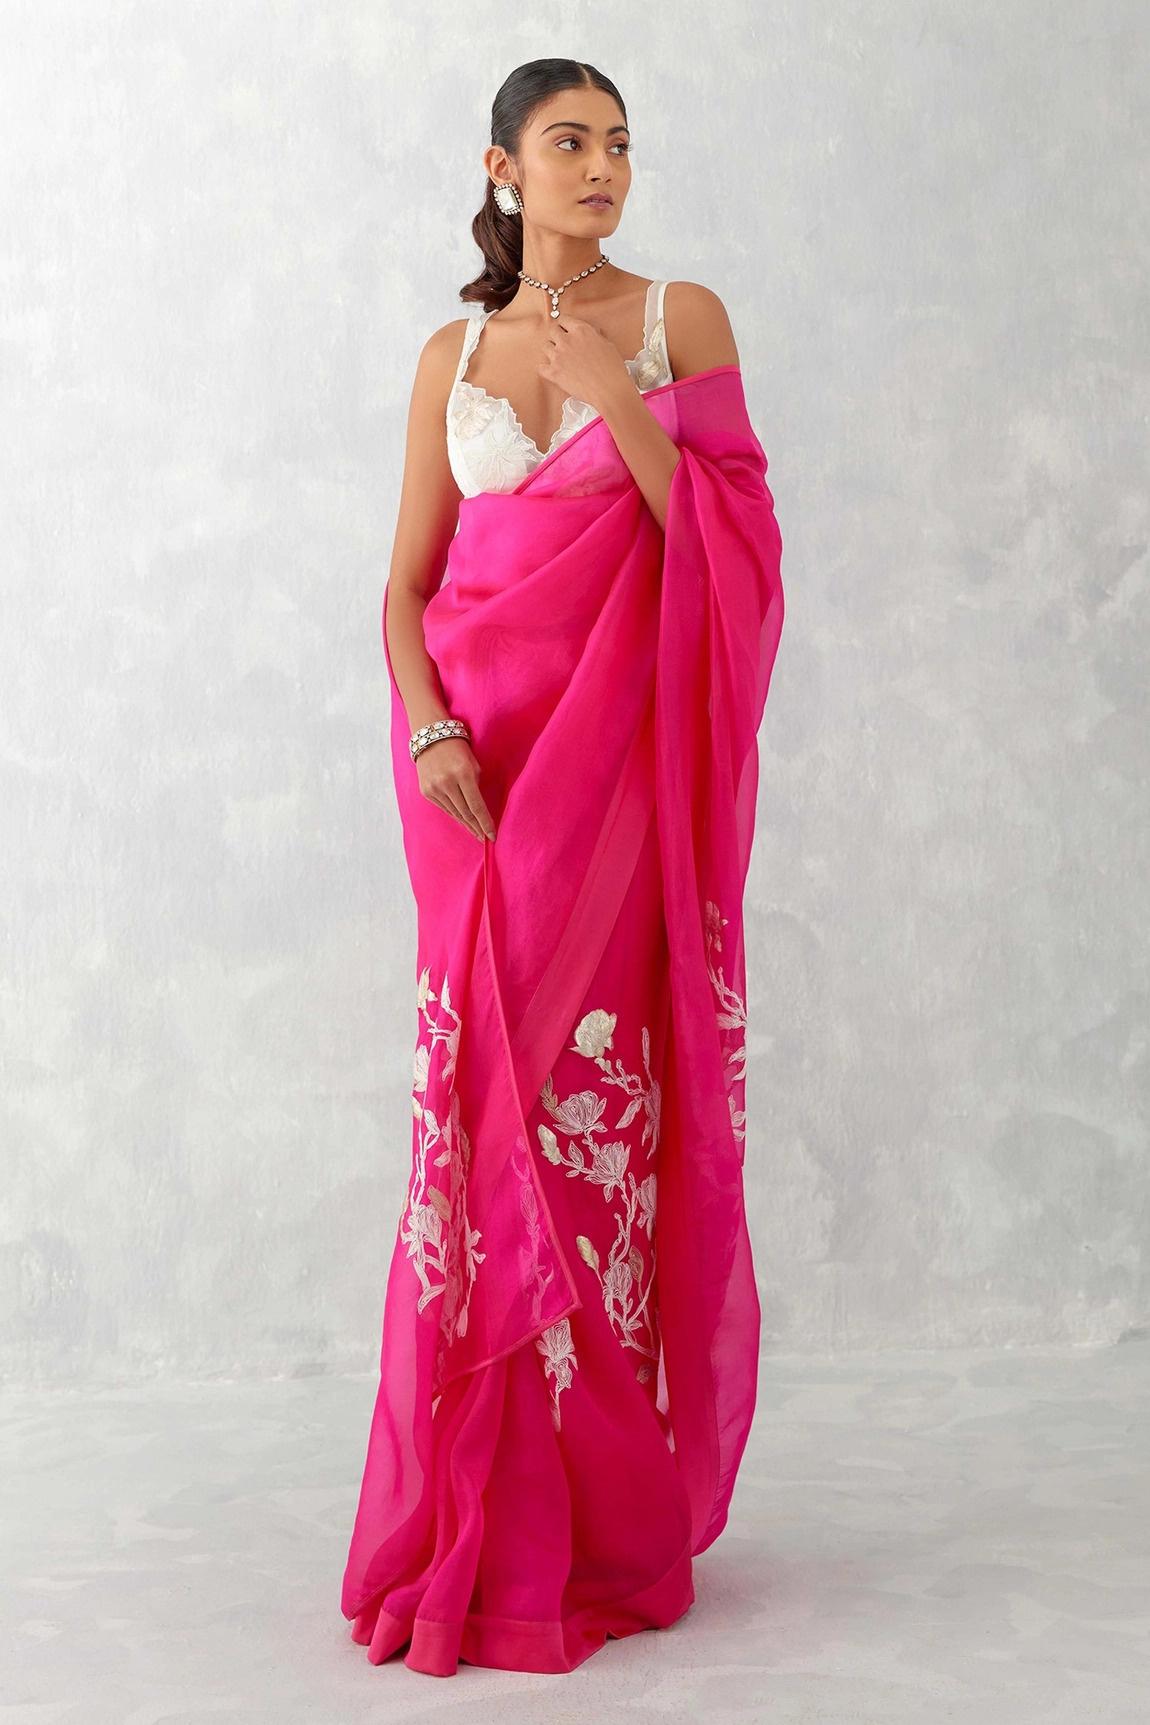 How to Make a Stylish Dress From Your Old Saree?